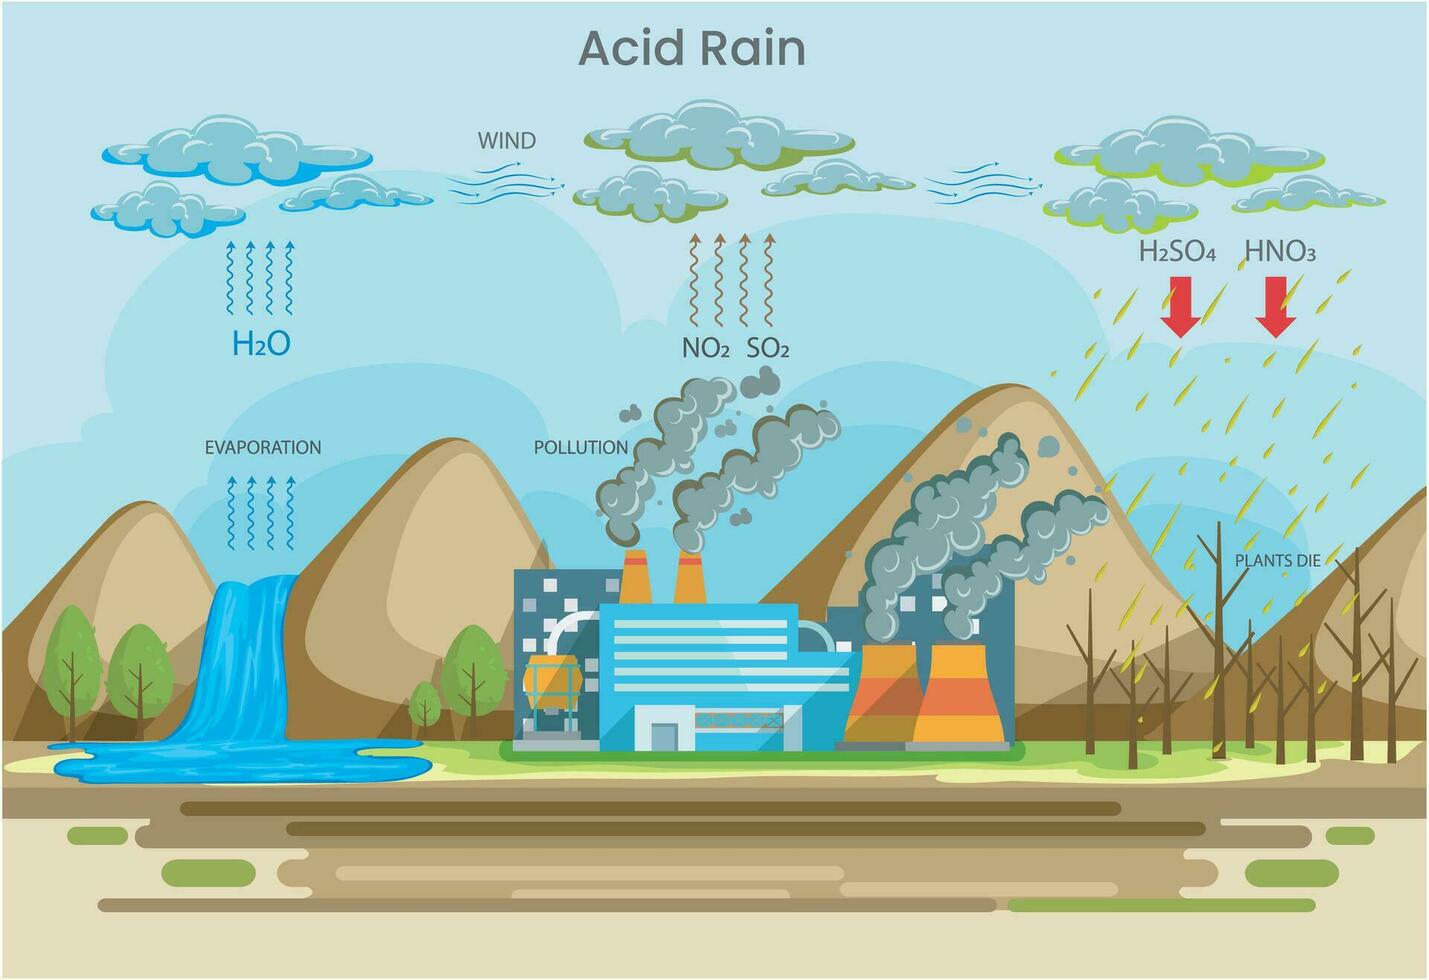 How to draw acid rain affects - YouTube